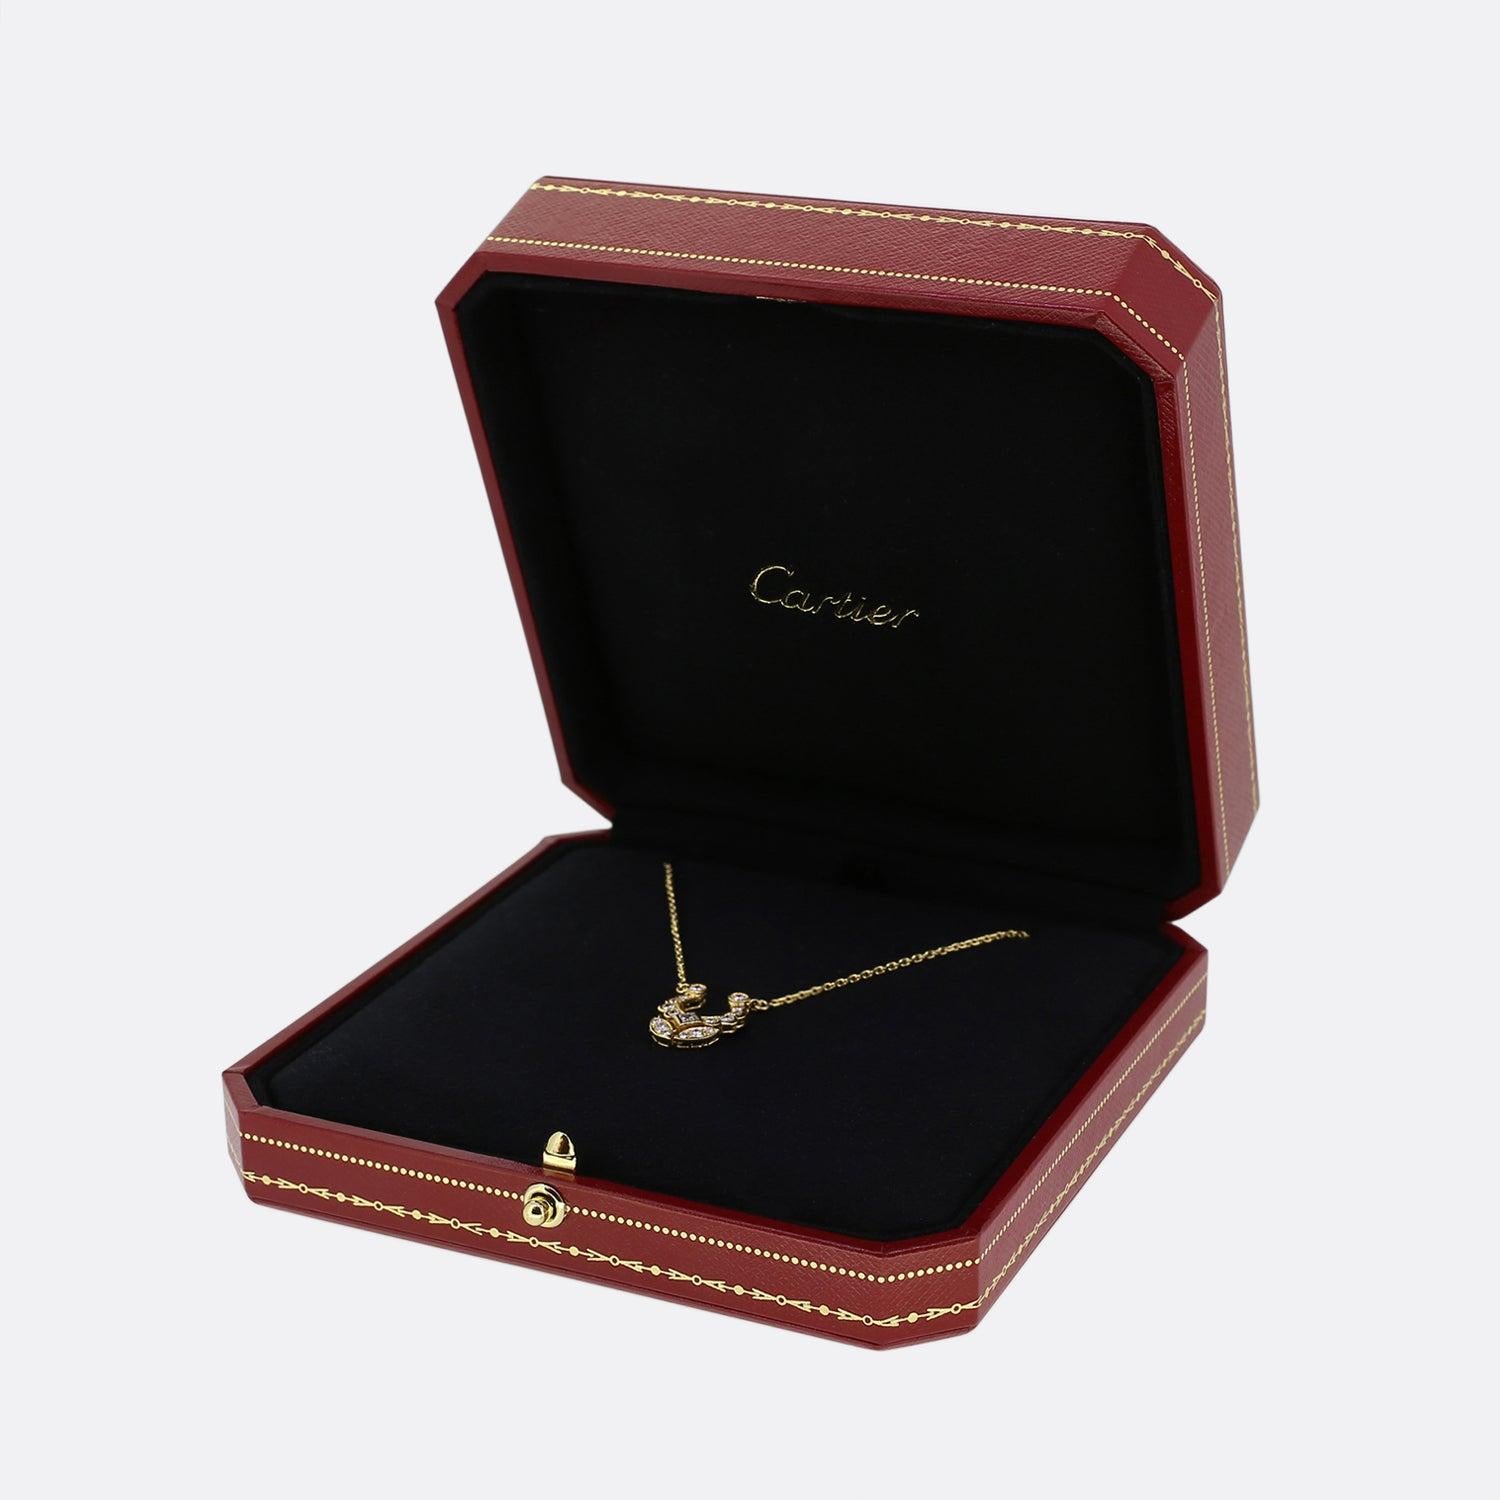 Cartier Vintage Horseshoe Diamond Pendant Necklace In Excellent Condition For Sale In London, GB